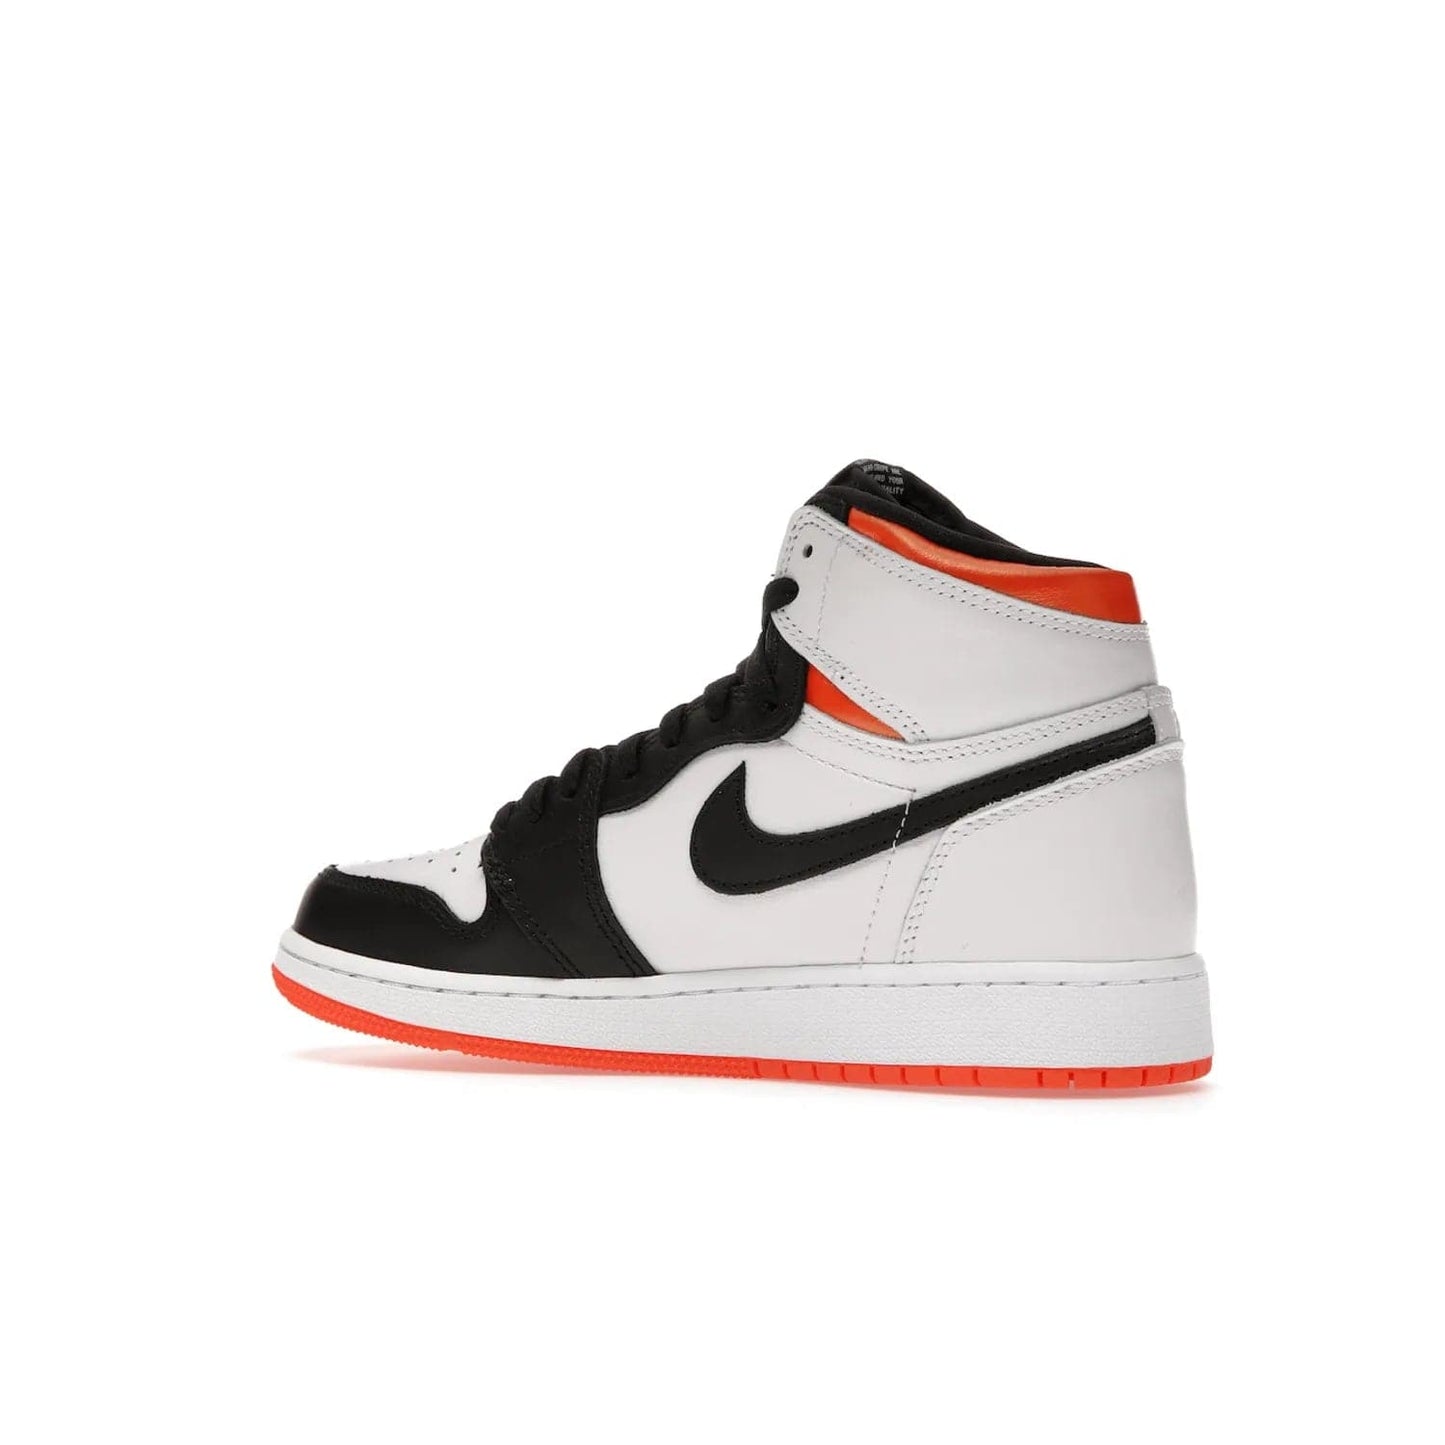 Jordan 1 High OG Electro Orange (GS) - Image 22 - Only at www.BallersClubKickz.com - The Air Jordan 1 High OG Electro Orange GS is the ideal shoe for kids on the go. Featuring white leather uppers, black overlays, and bright orange accents, it's sure to become a favorite. A great mix of classic style and vibrant colors, the shoe delivers air cushioning for comfort and hard orange rubber for grip. Release on July 17th, 2021. Get them a pair today.